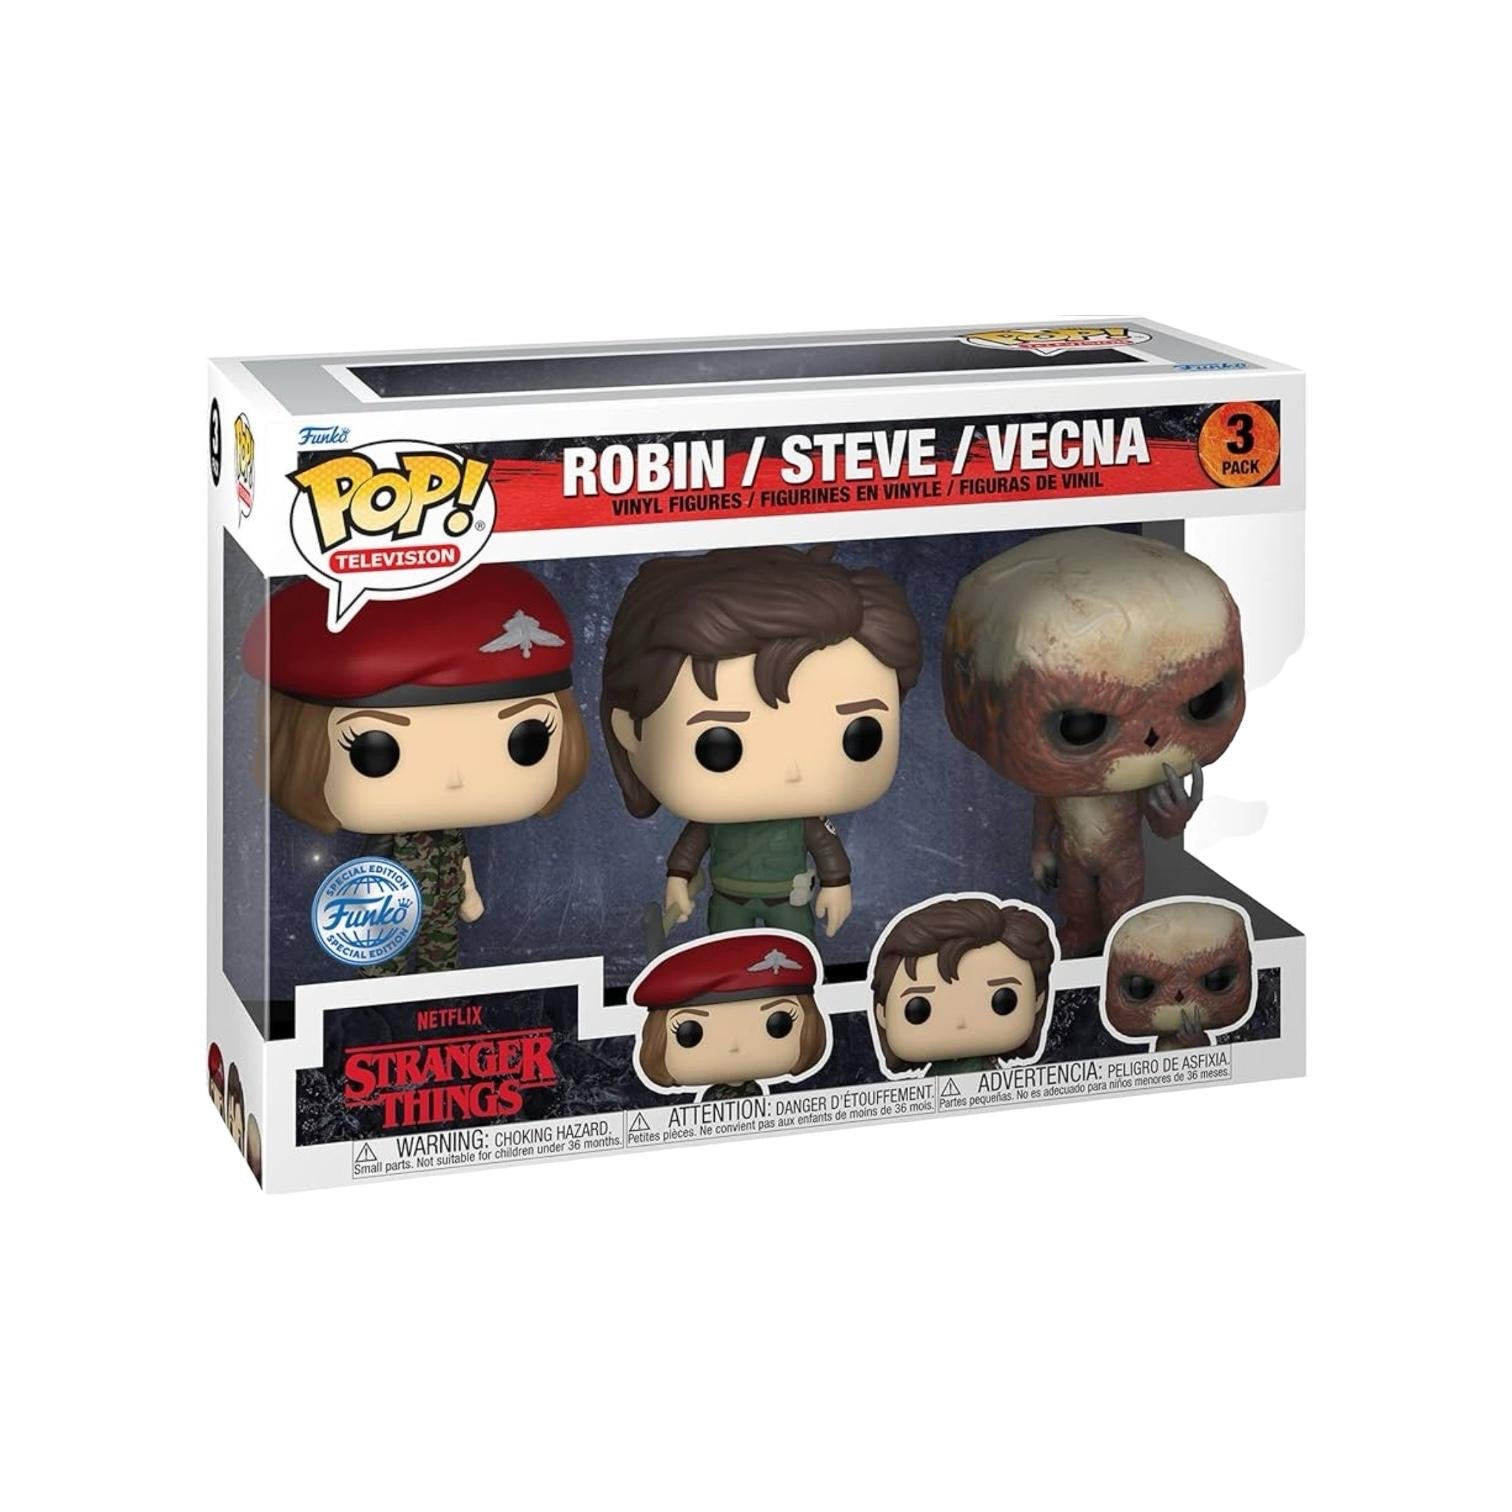 Robin / Steve / Vecna Deluxe Funko 3 Pack! Stranger Things - Funko Special Edition - Pop Figures Exclusive